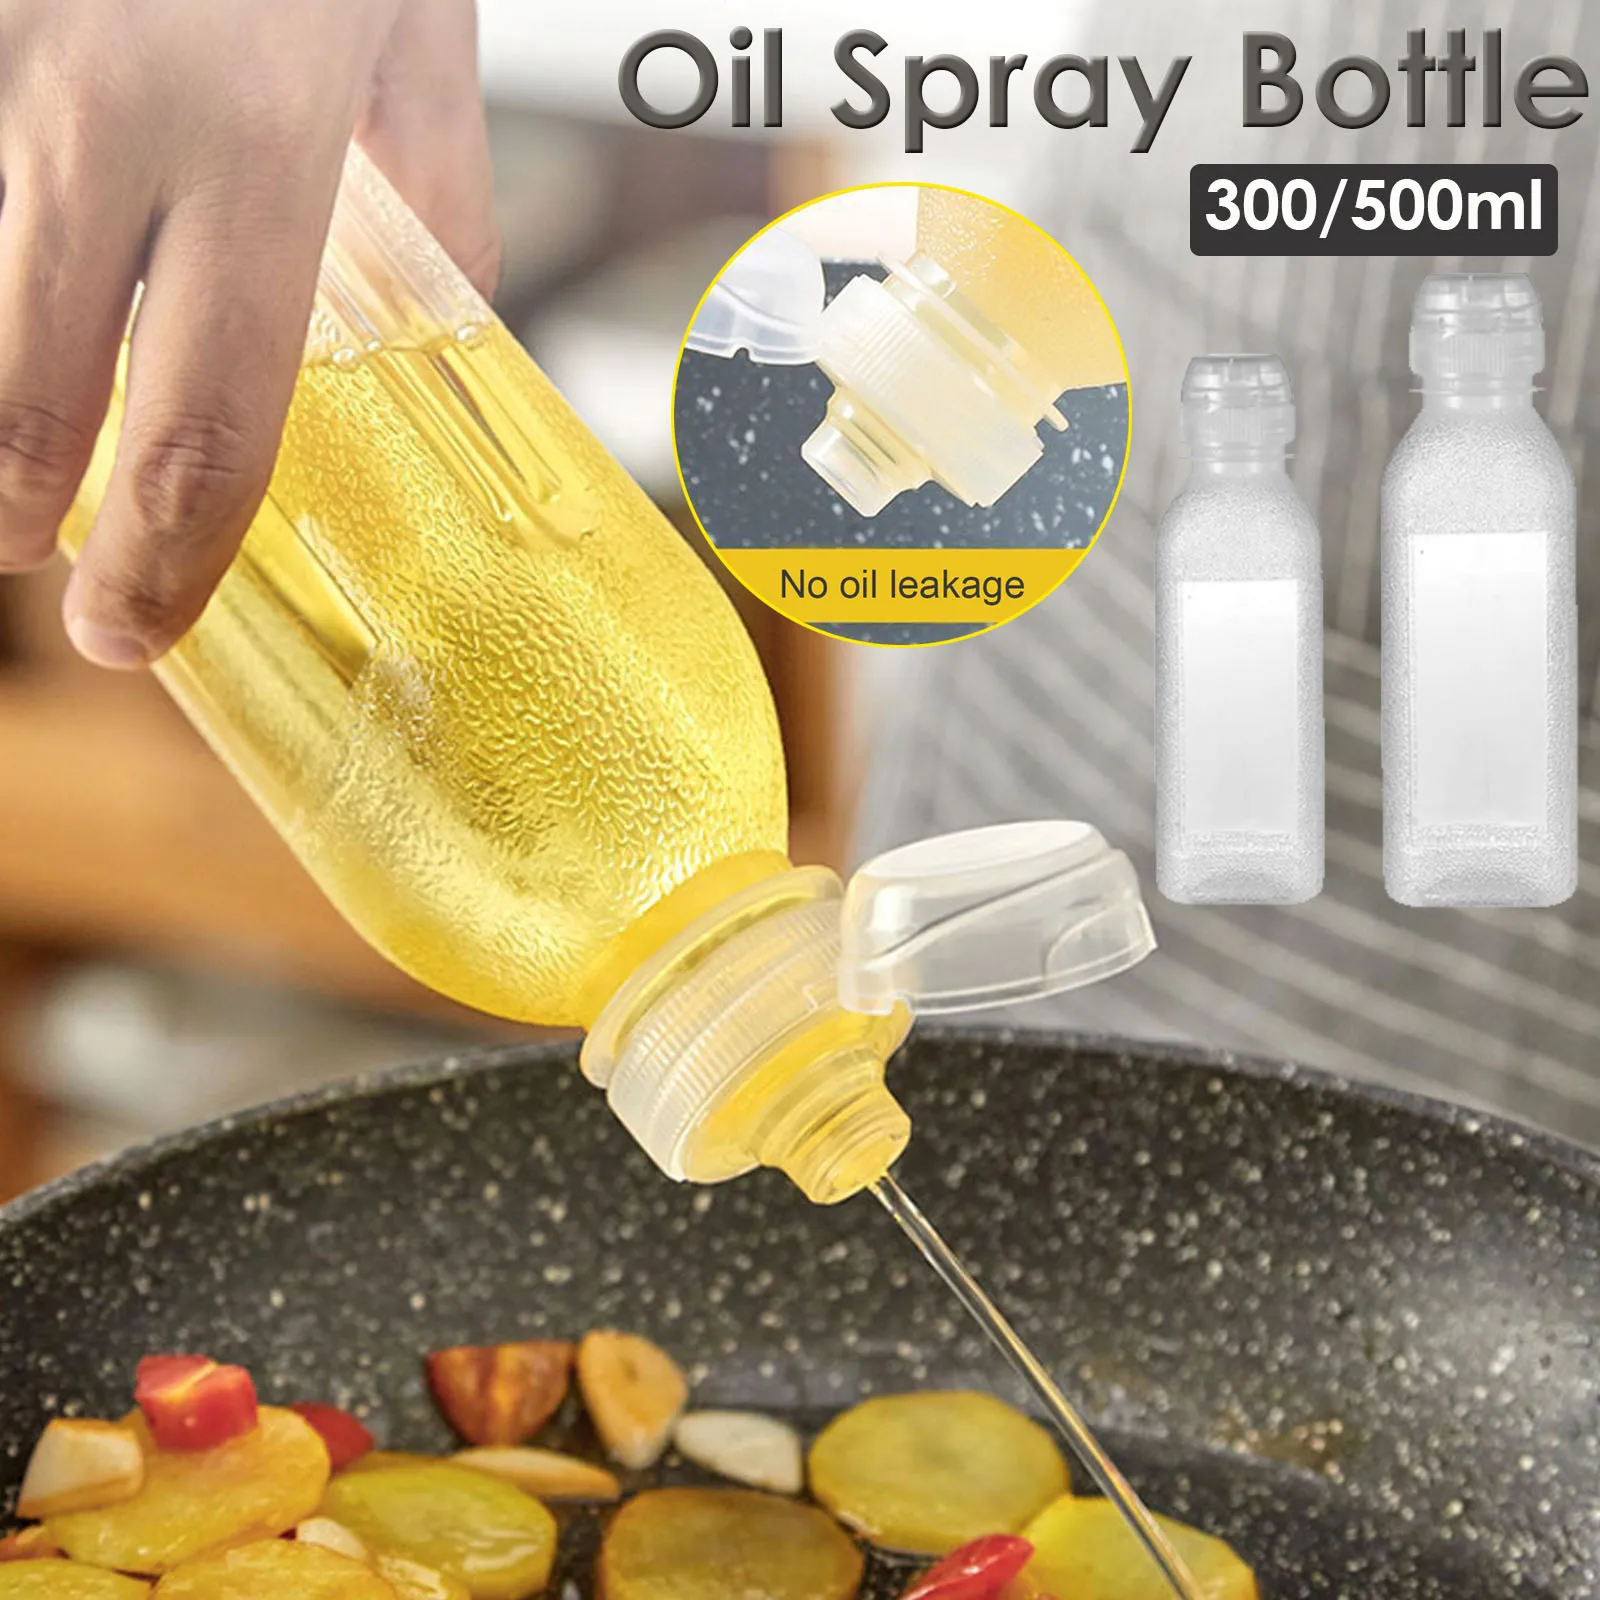 

2Pcs Kitchen Oil Spray Bottle Condiment Squeeze Bottles Cooking Baking Ketchup Mustard Mayo Hot Sauces Olive BBQ Oil Bottles